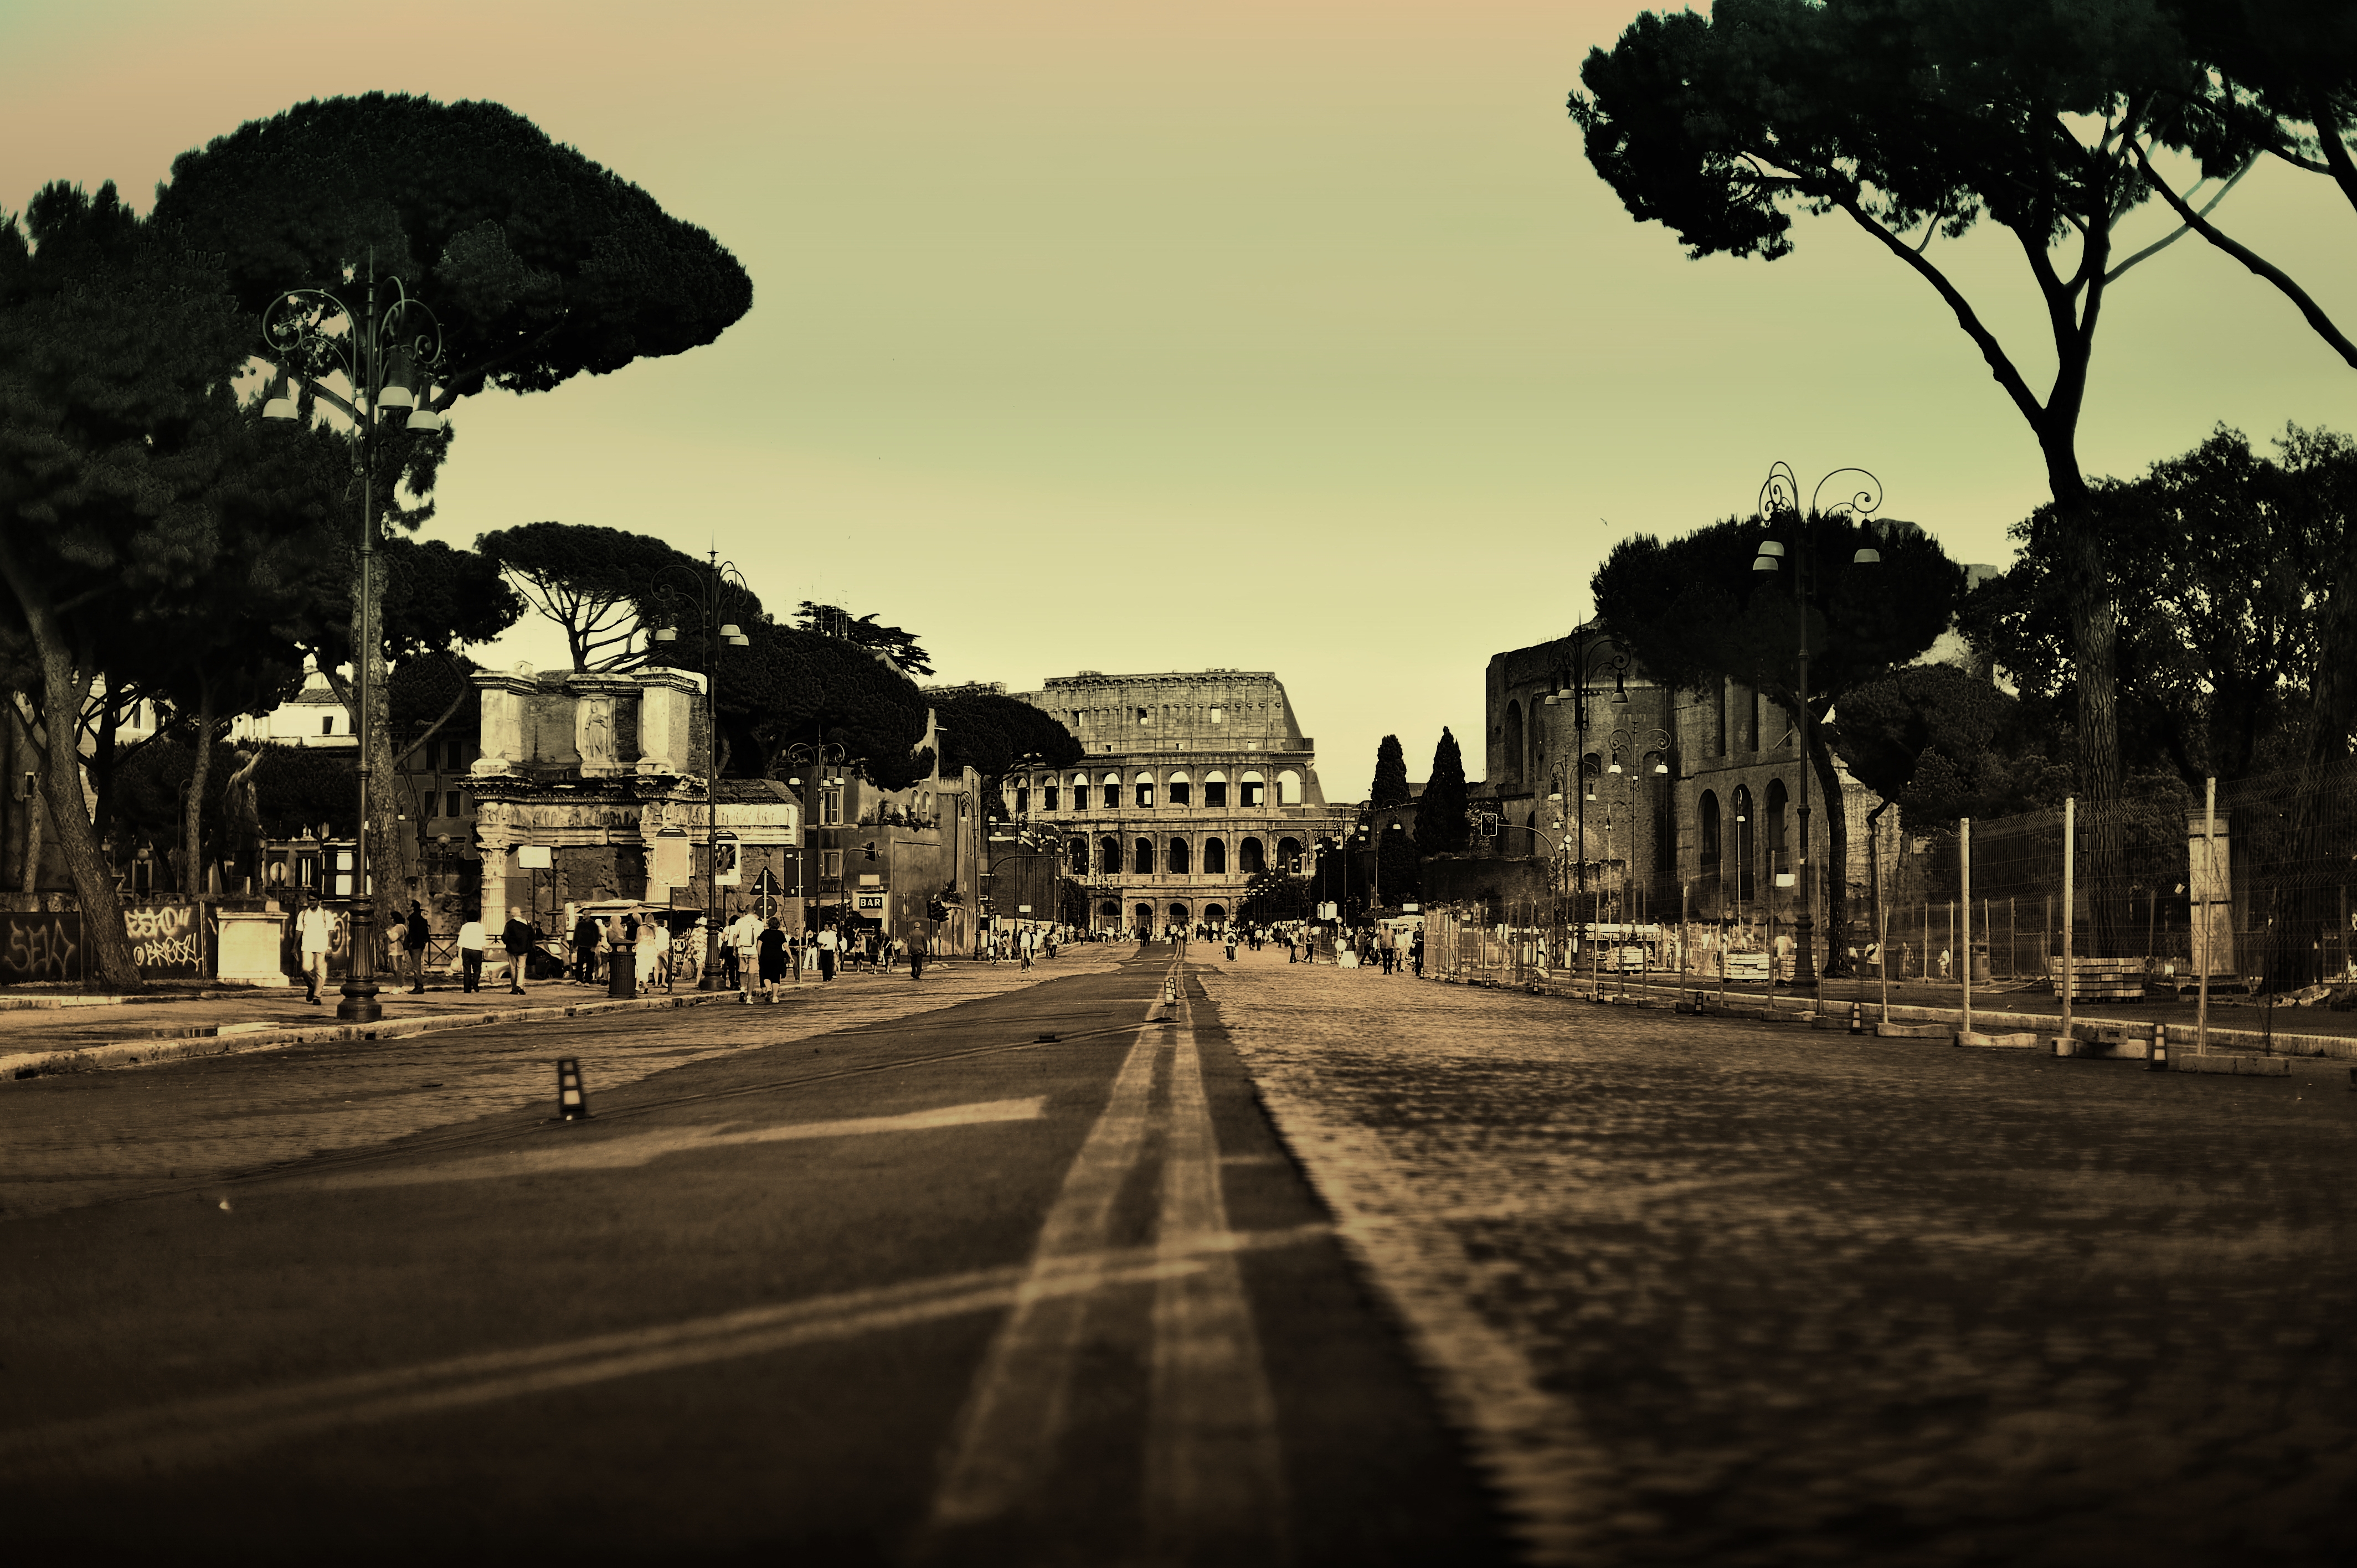 colosseum, city, cities, people, trees, italy, road, street, rome